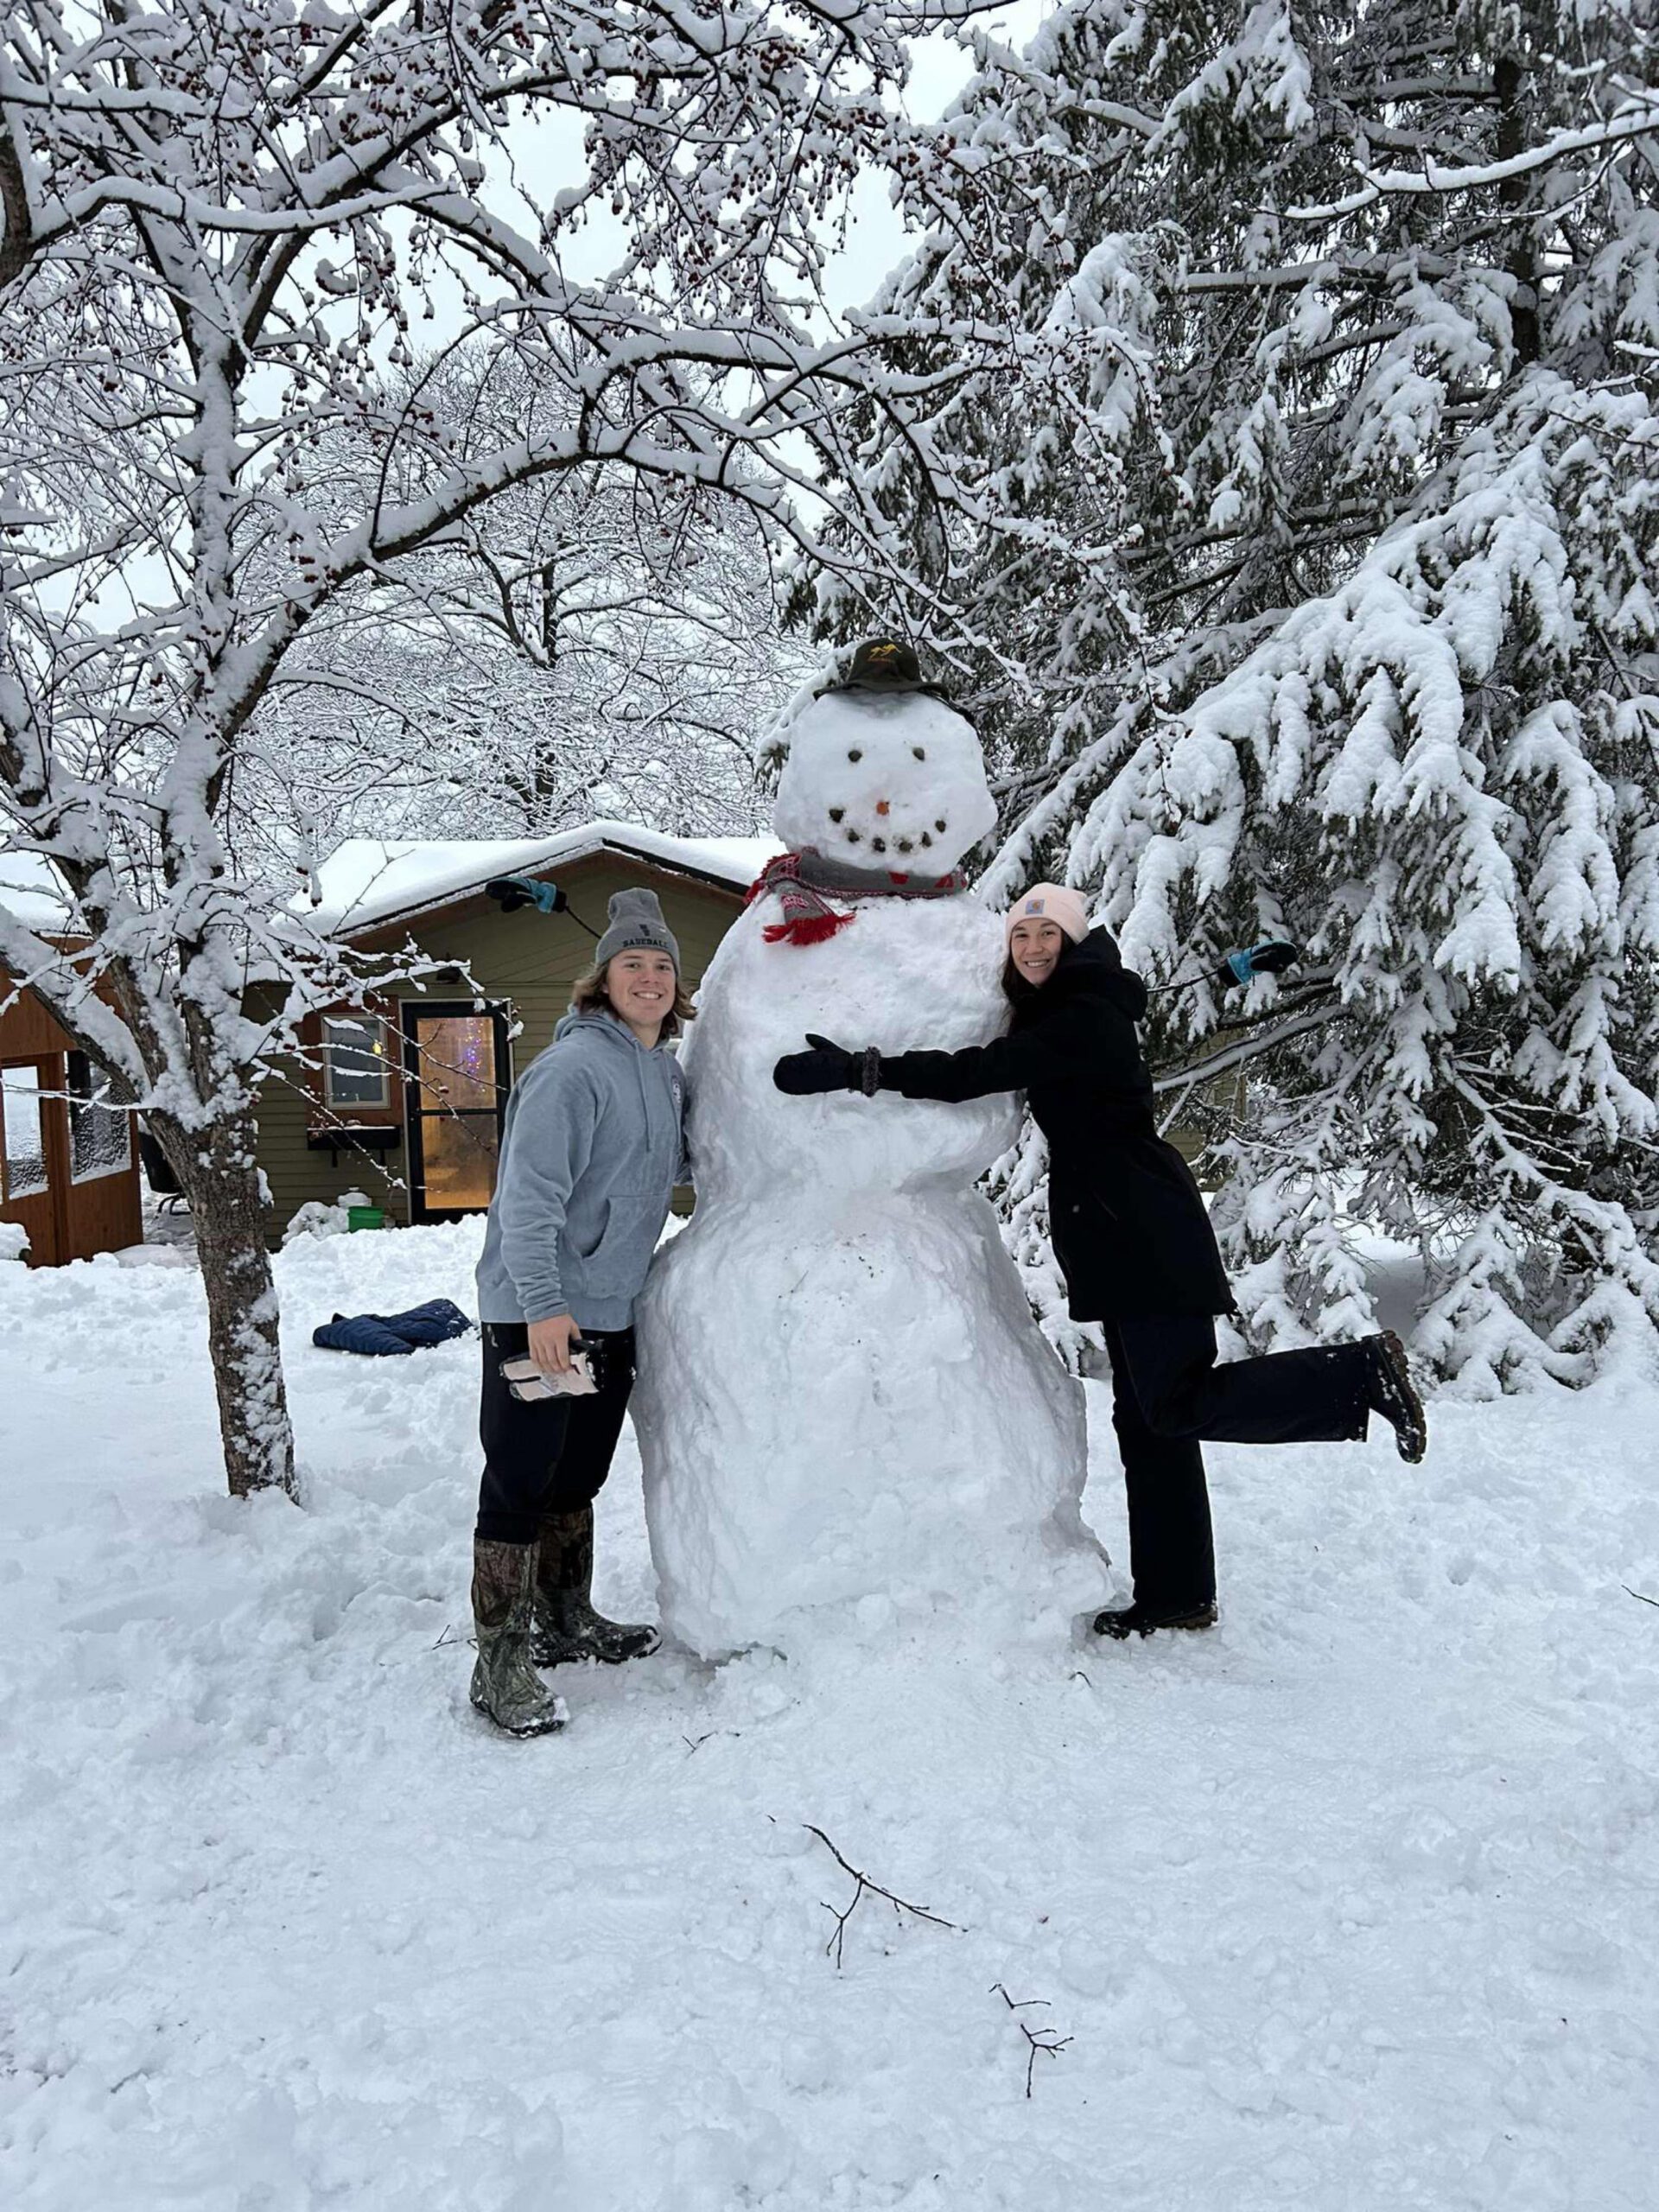 Tall snowman with black hat being hugged by girl and a boy stands on the left